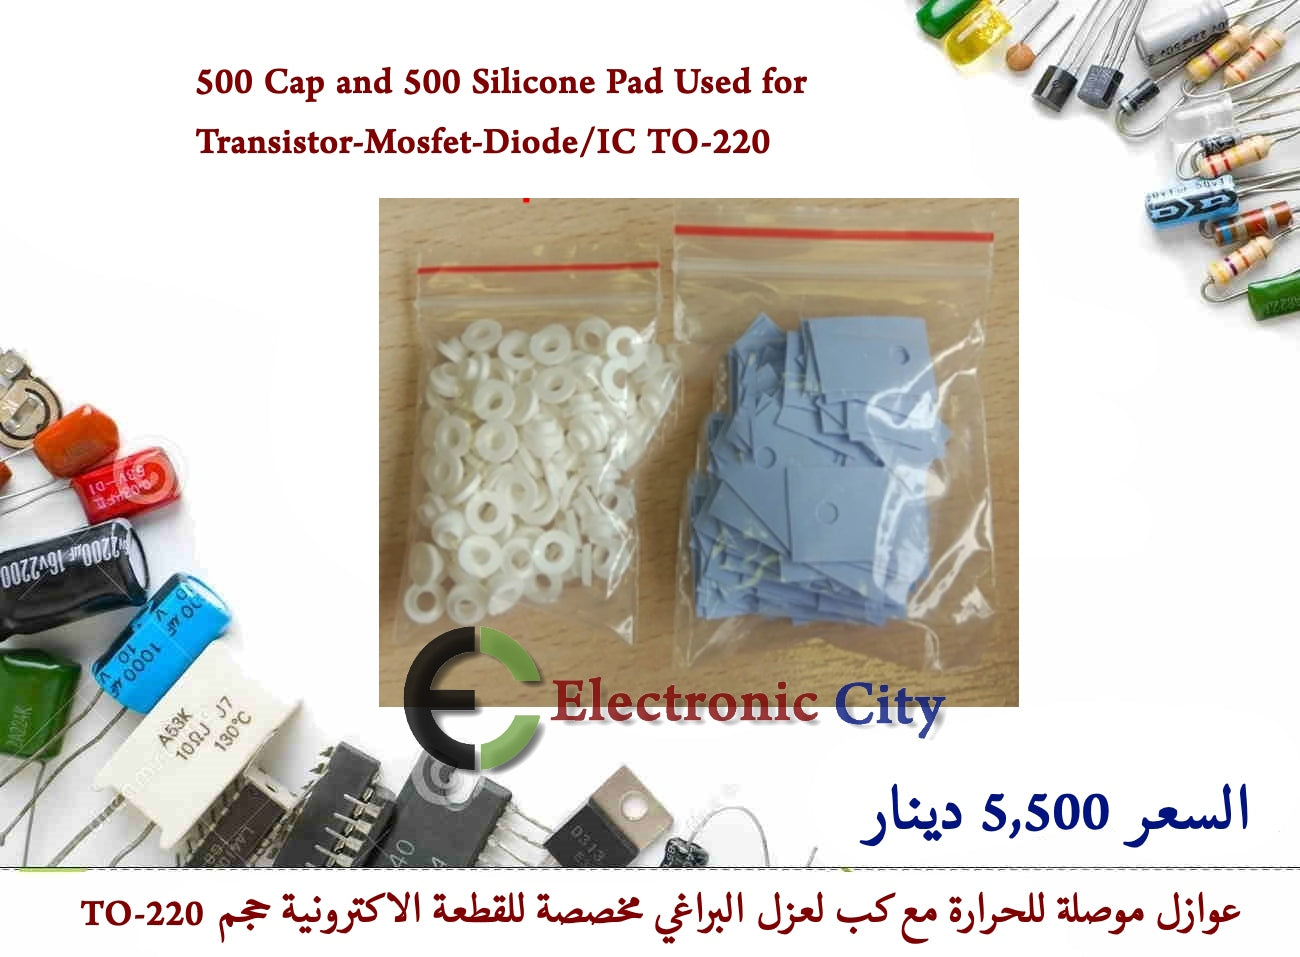 500 Cap and 500 Silicone Pad Used for Transistor-Mosfet-Diode-IC TO-220